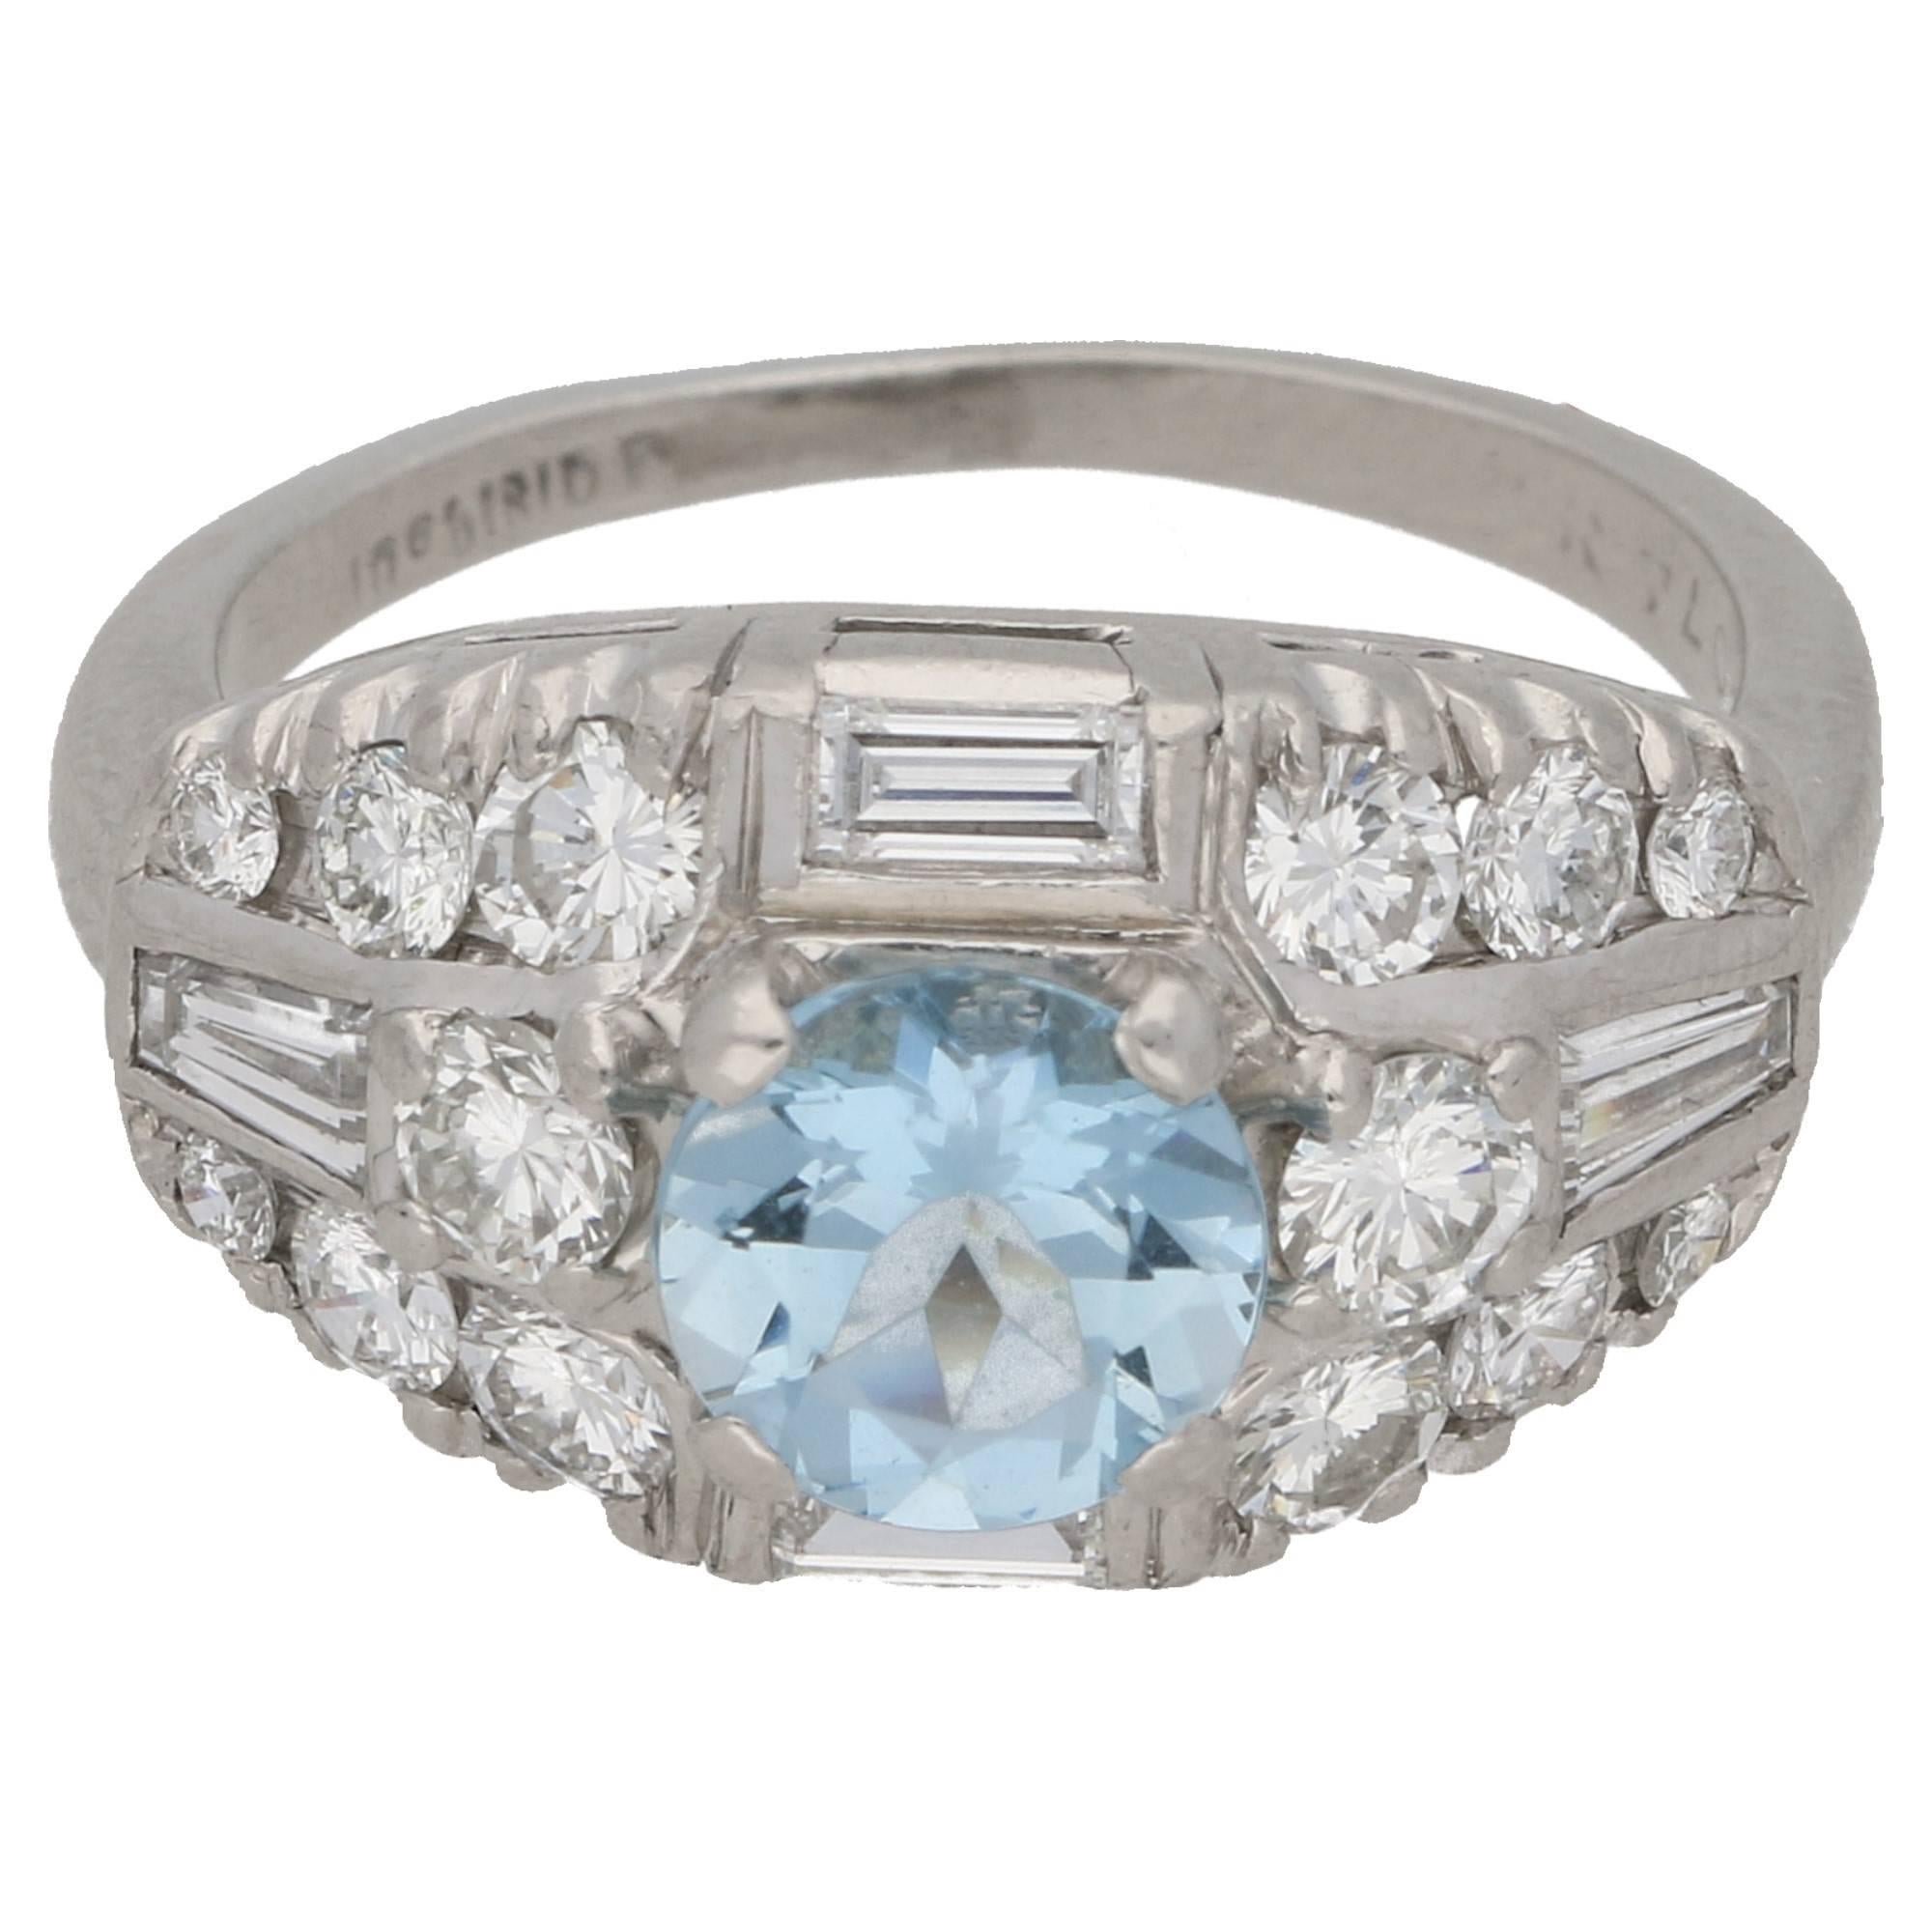 An Art Deco aquamarine and diamond bombe cocktail ring in platinum. The ring features a round-shape aquamarine four-claw-set to the centre, amidst a bombe-shape collet rubover- and claw-set throughout with baguette-cut, tapered baguette-cut,